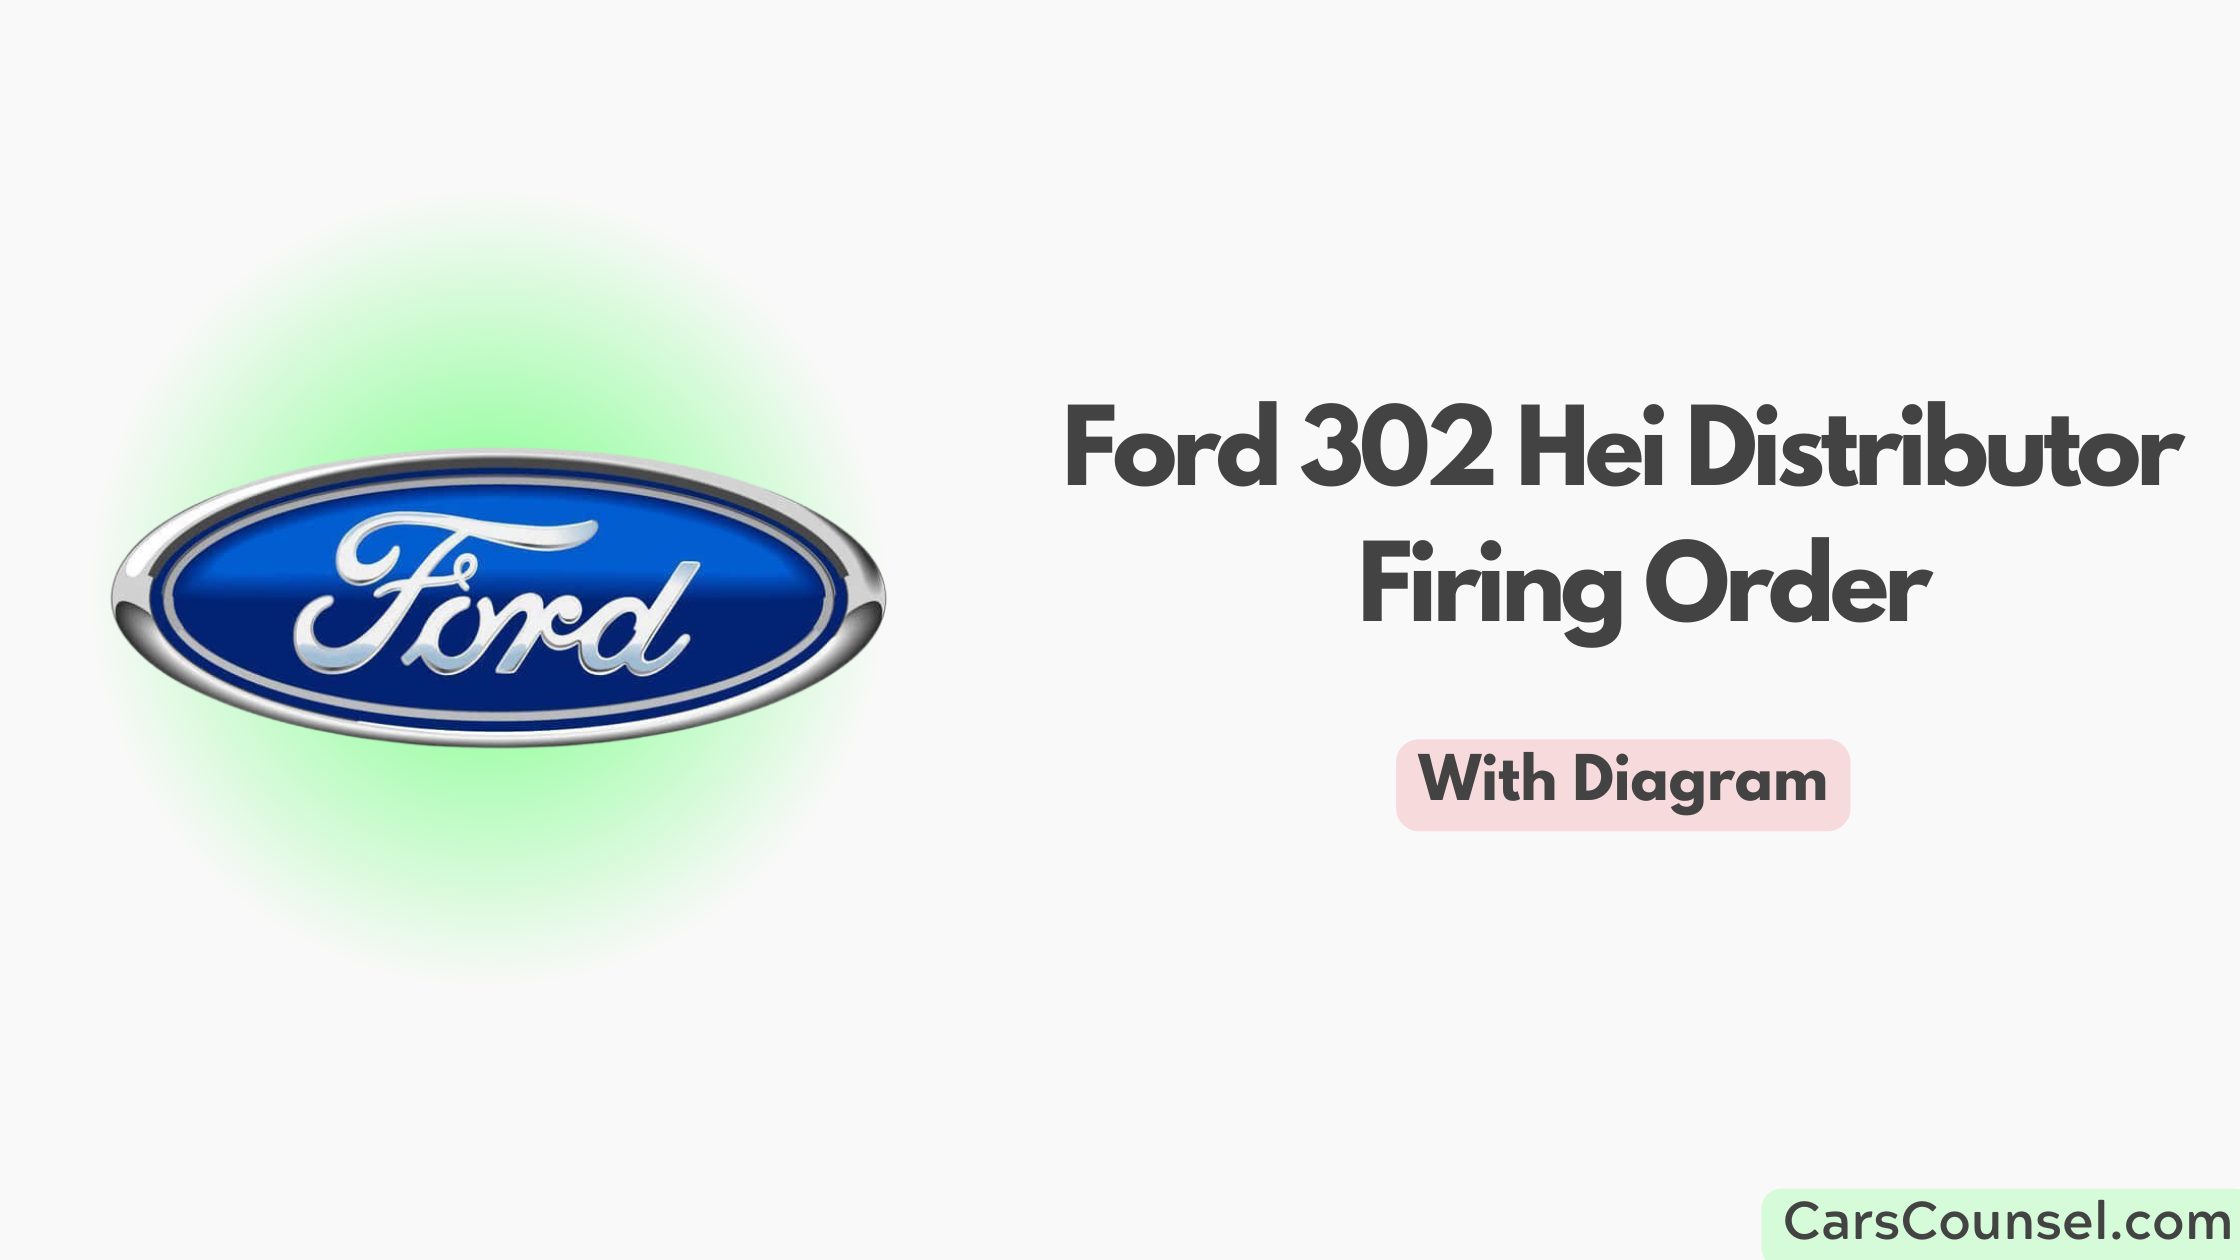 Ford 302 Hei Distributor Firing Order With Diagram